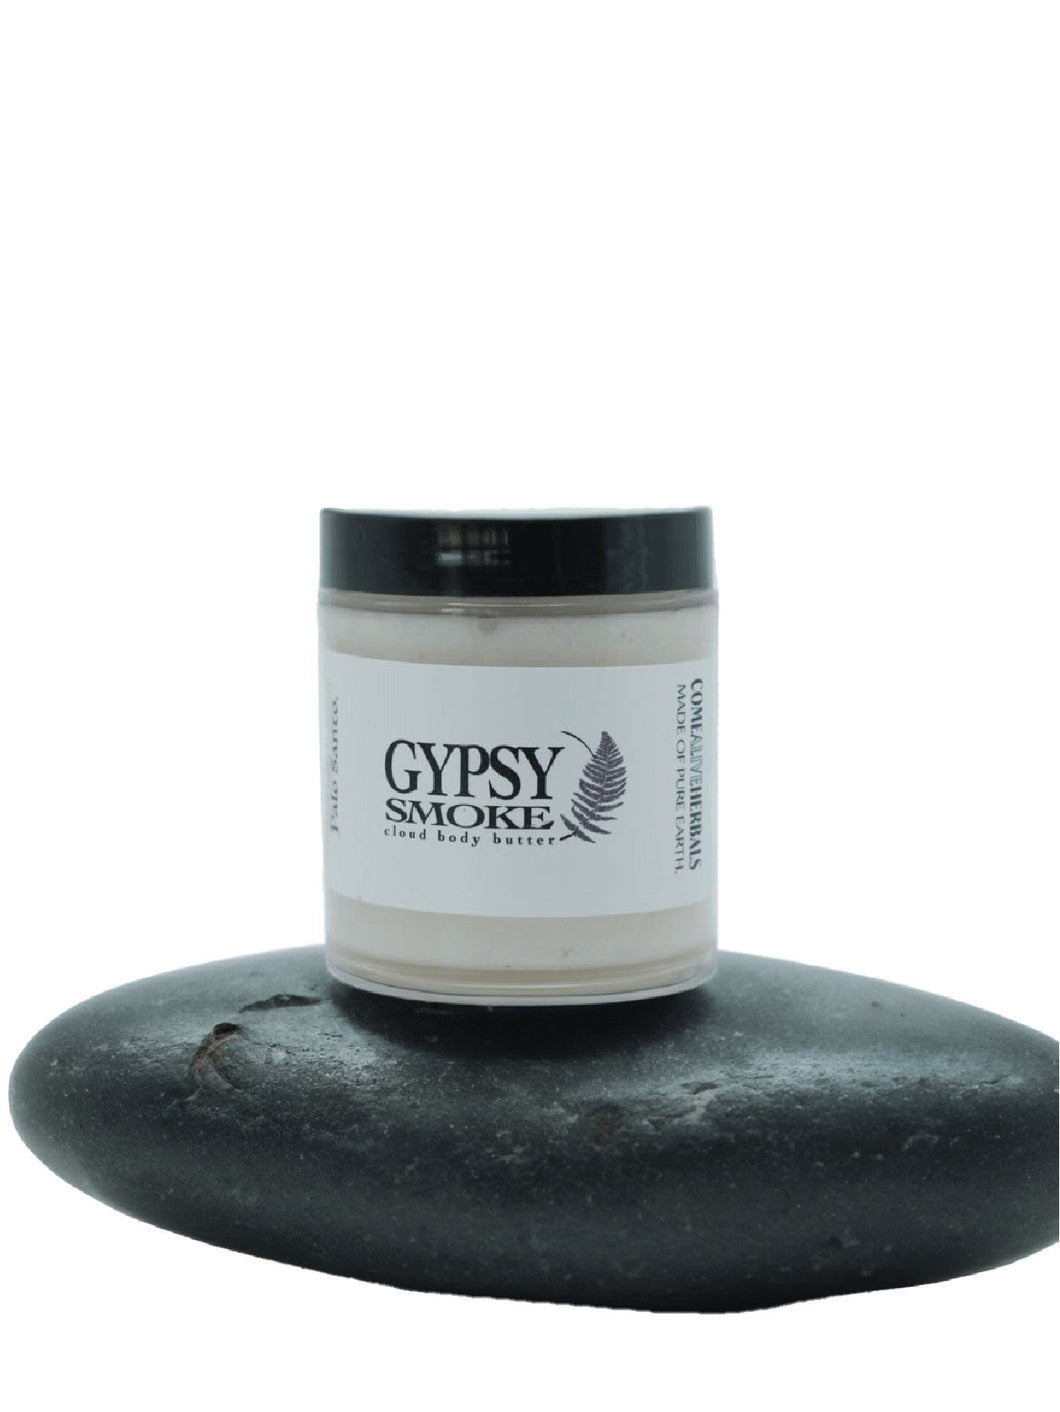 Come Alive Herbals - Gypsy Smoke Cloud Butter by Come Alive Herbals - | Delivery near me in ... Farm2Me #url#